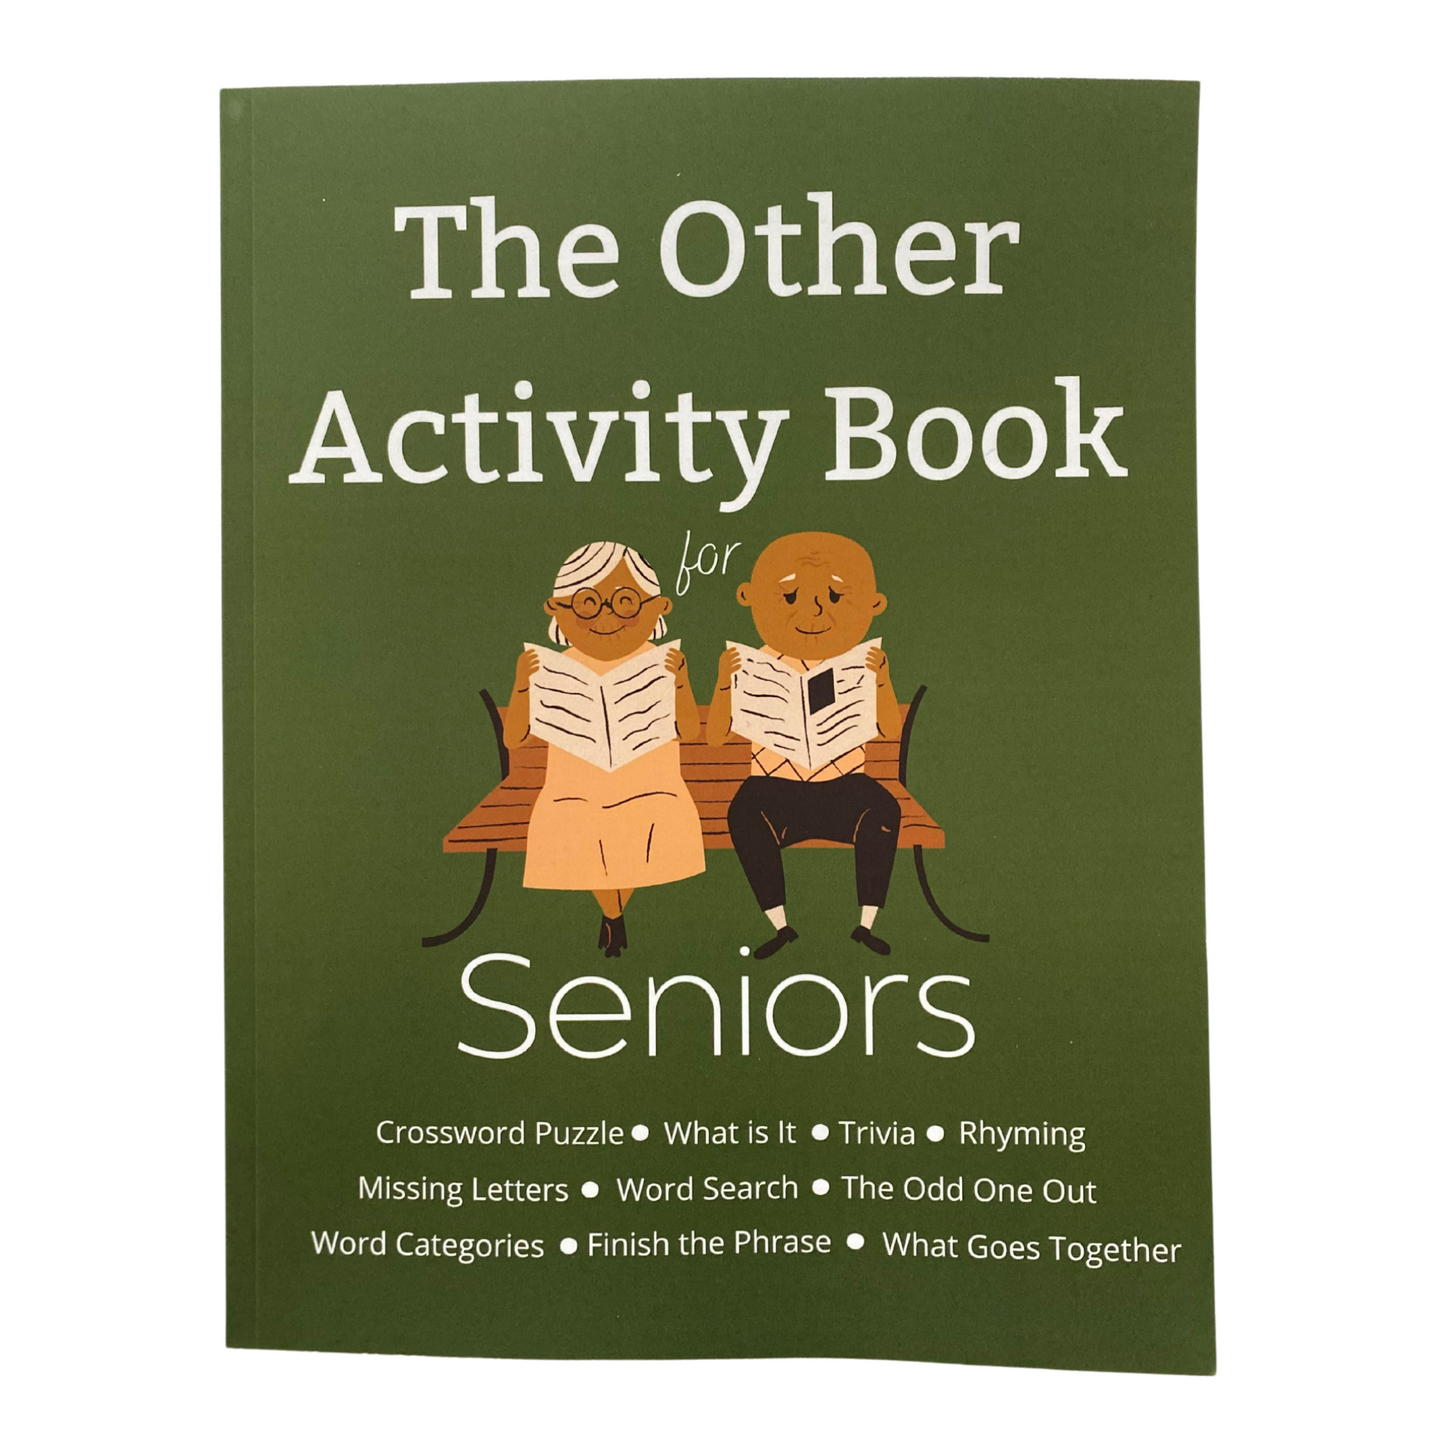 The Other Activity Book for Seniors